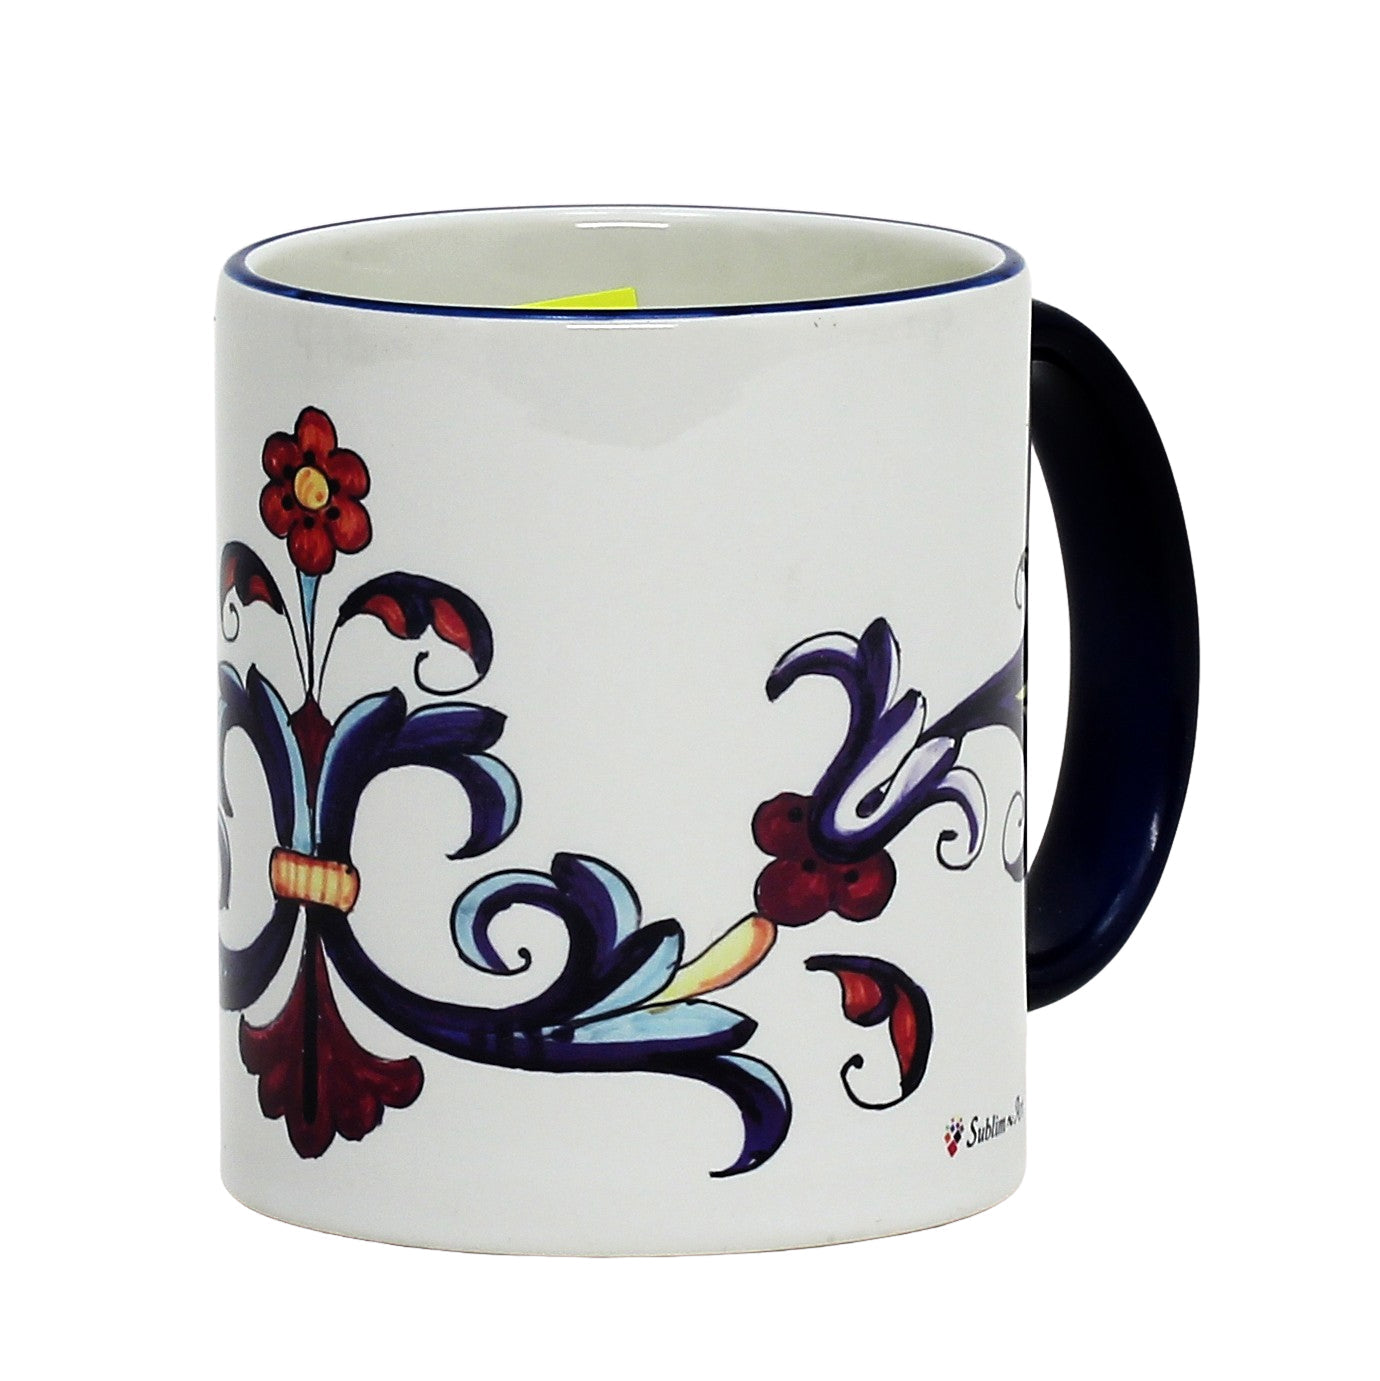 SUBLIMART: Printed Deruta style Mug with Blue Rim with simplified design